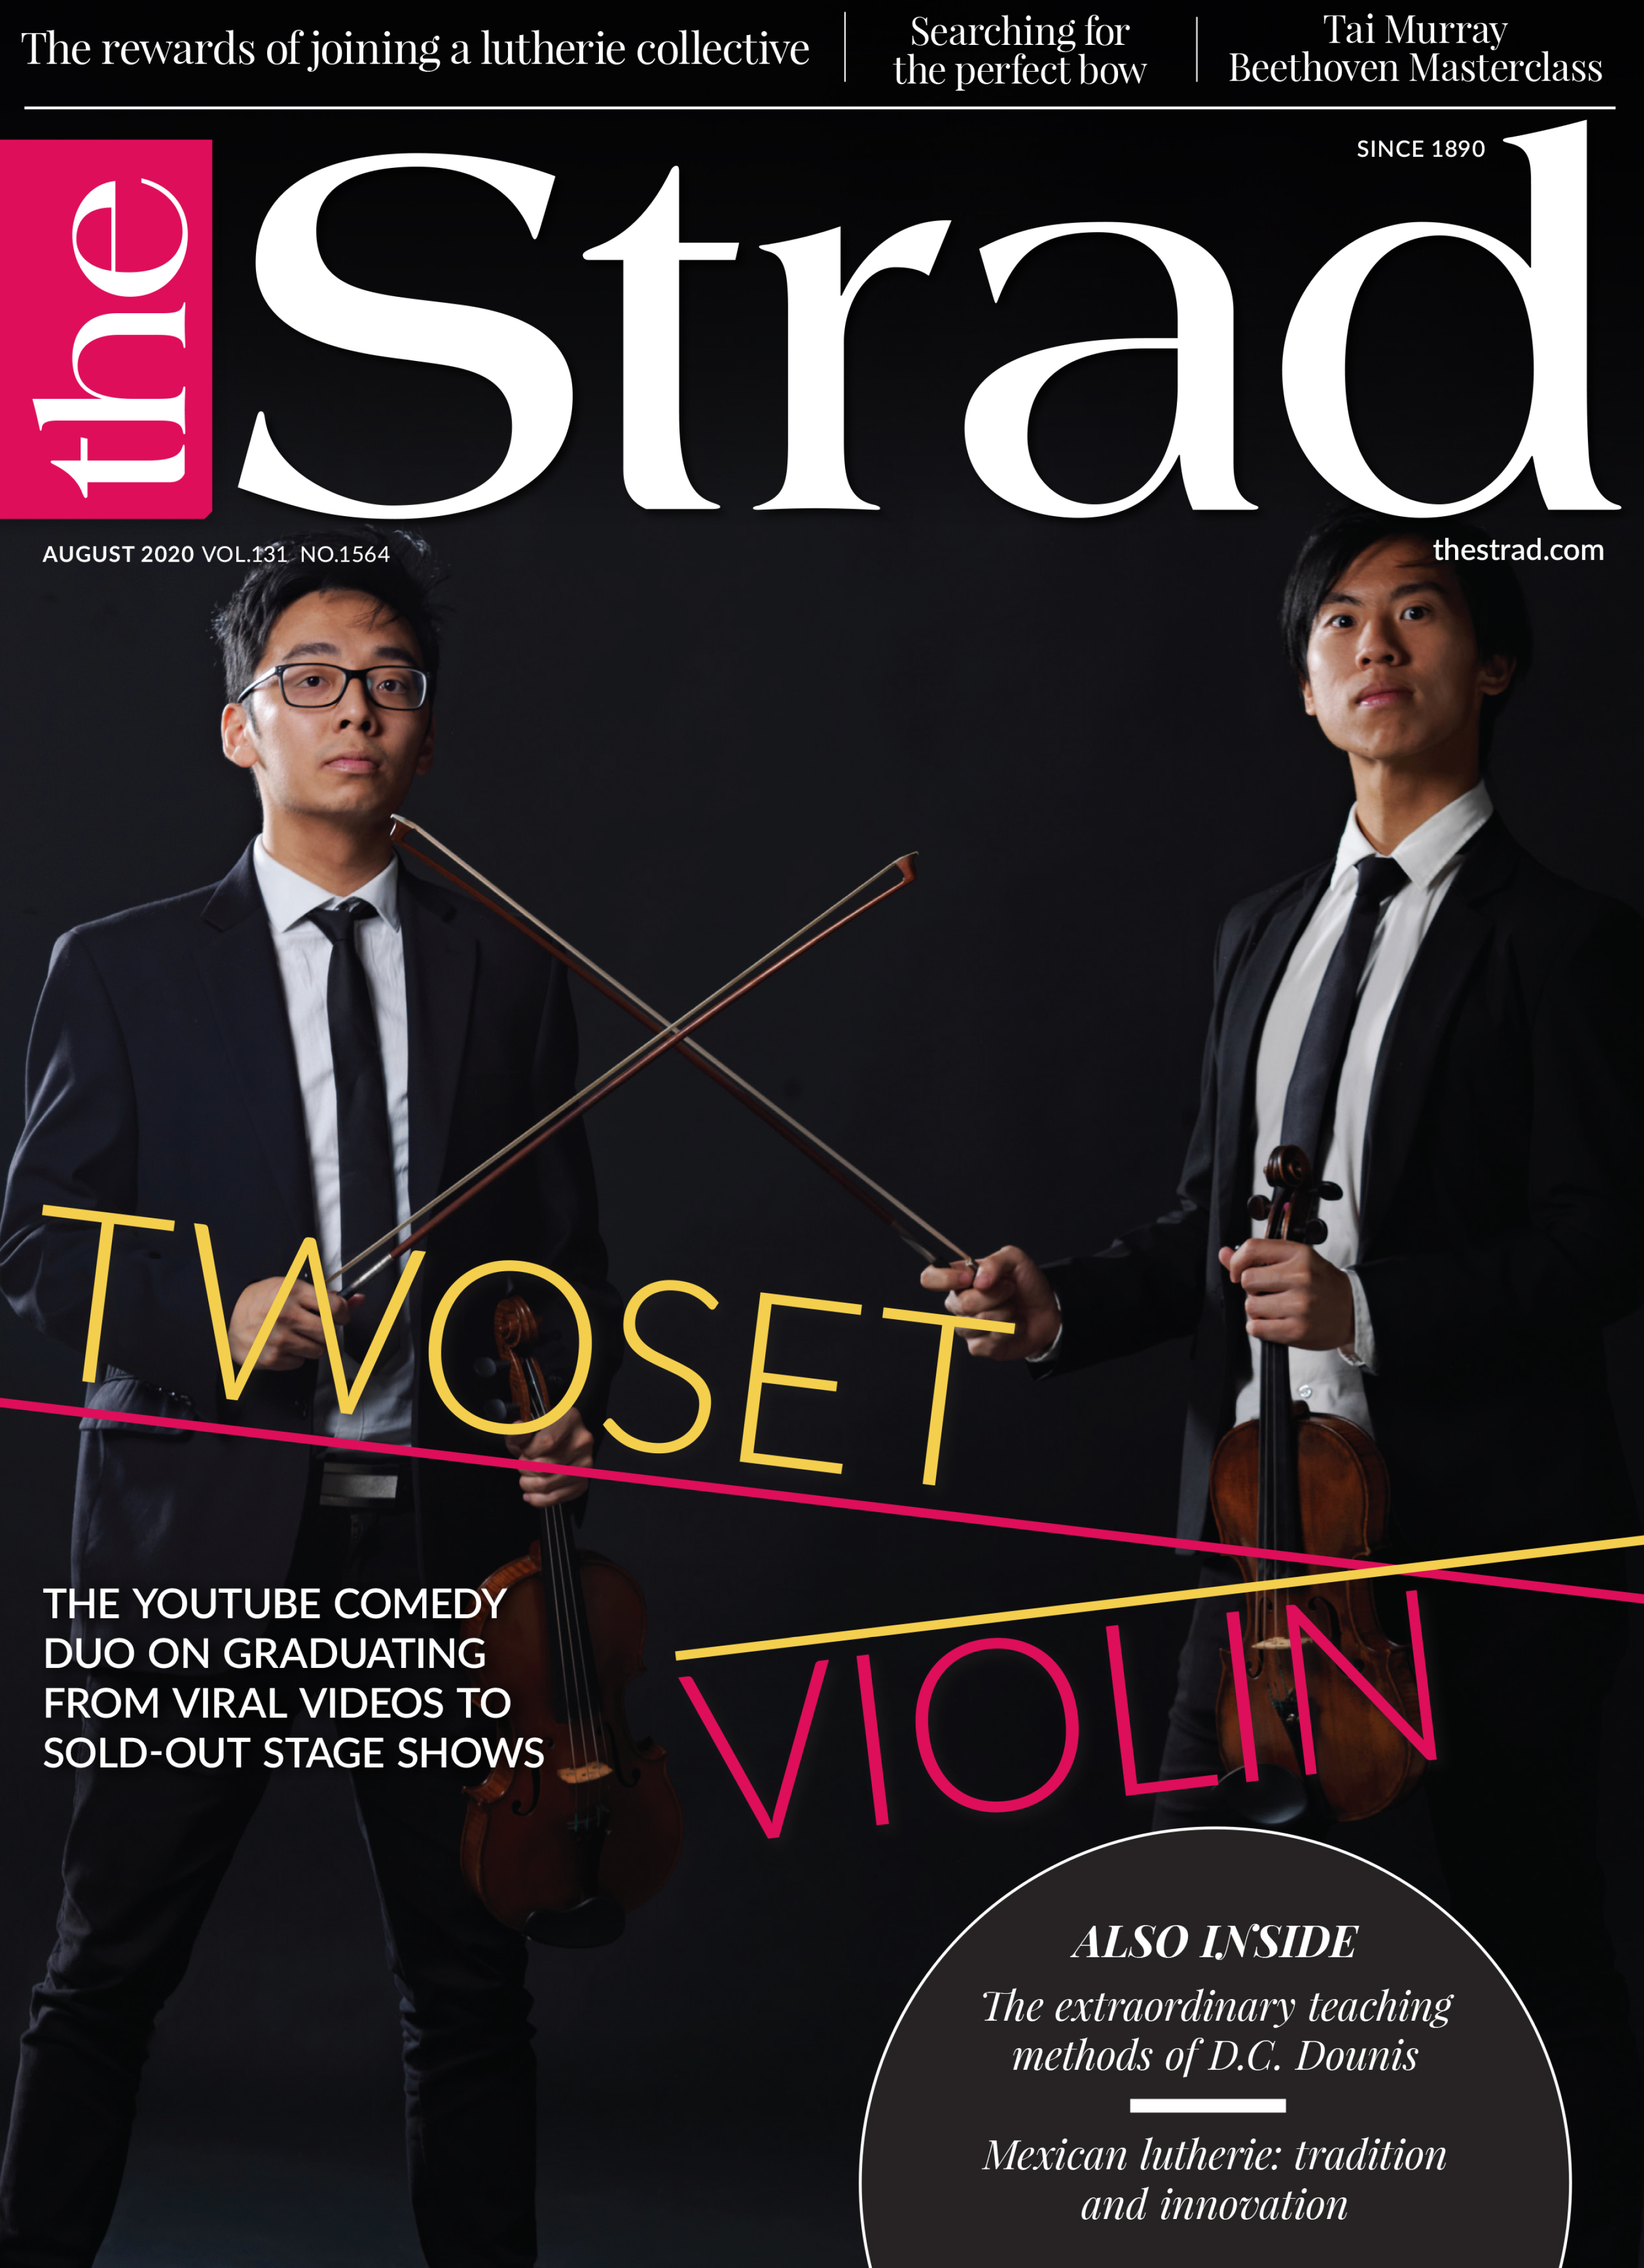 TwoSet Violin: The YouTube comedy duo on graduating from viral videos to sold-out stage shows | August 2020 issue | The Strad